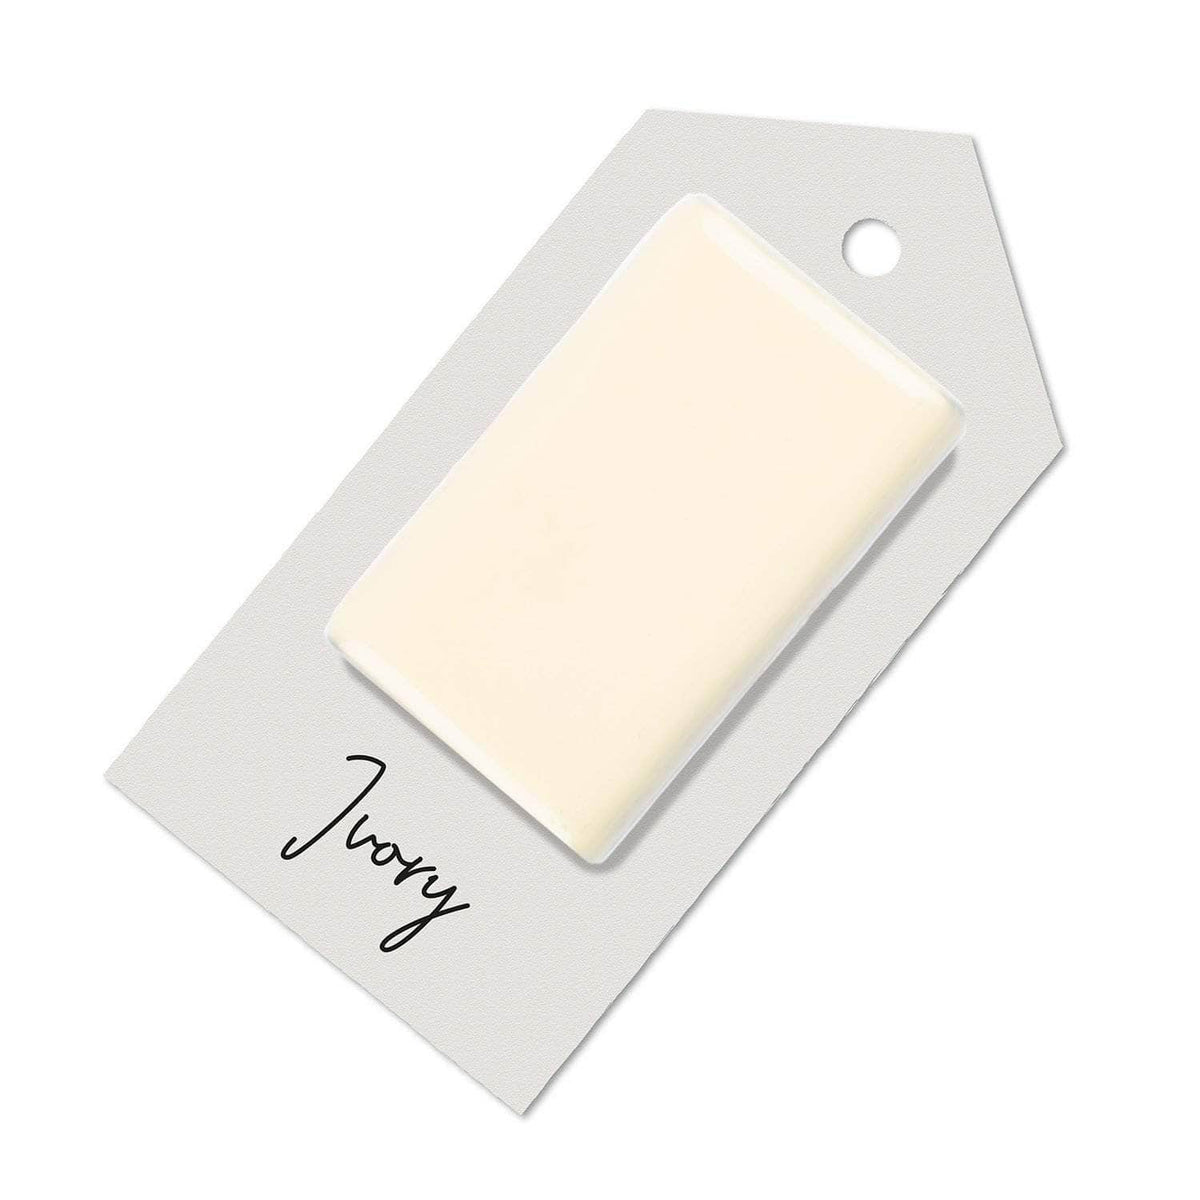 Ivory sample for Aga range cooker re-enamelling &amp; reconditioned cookers